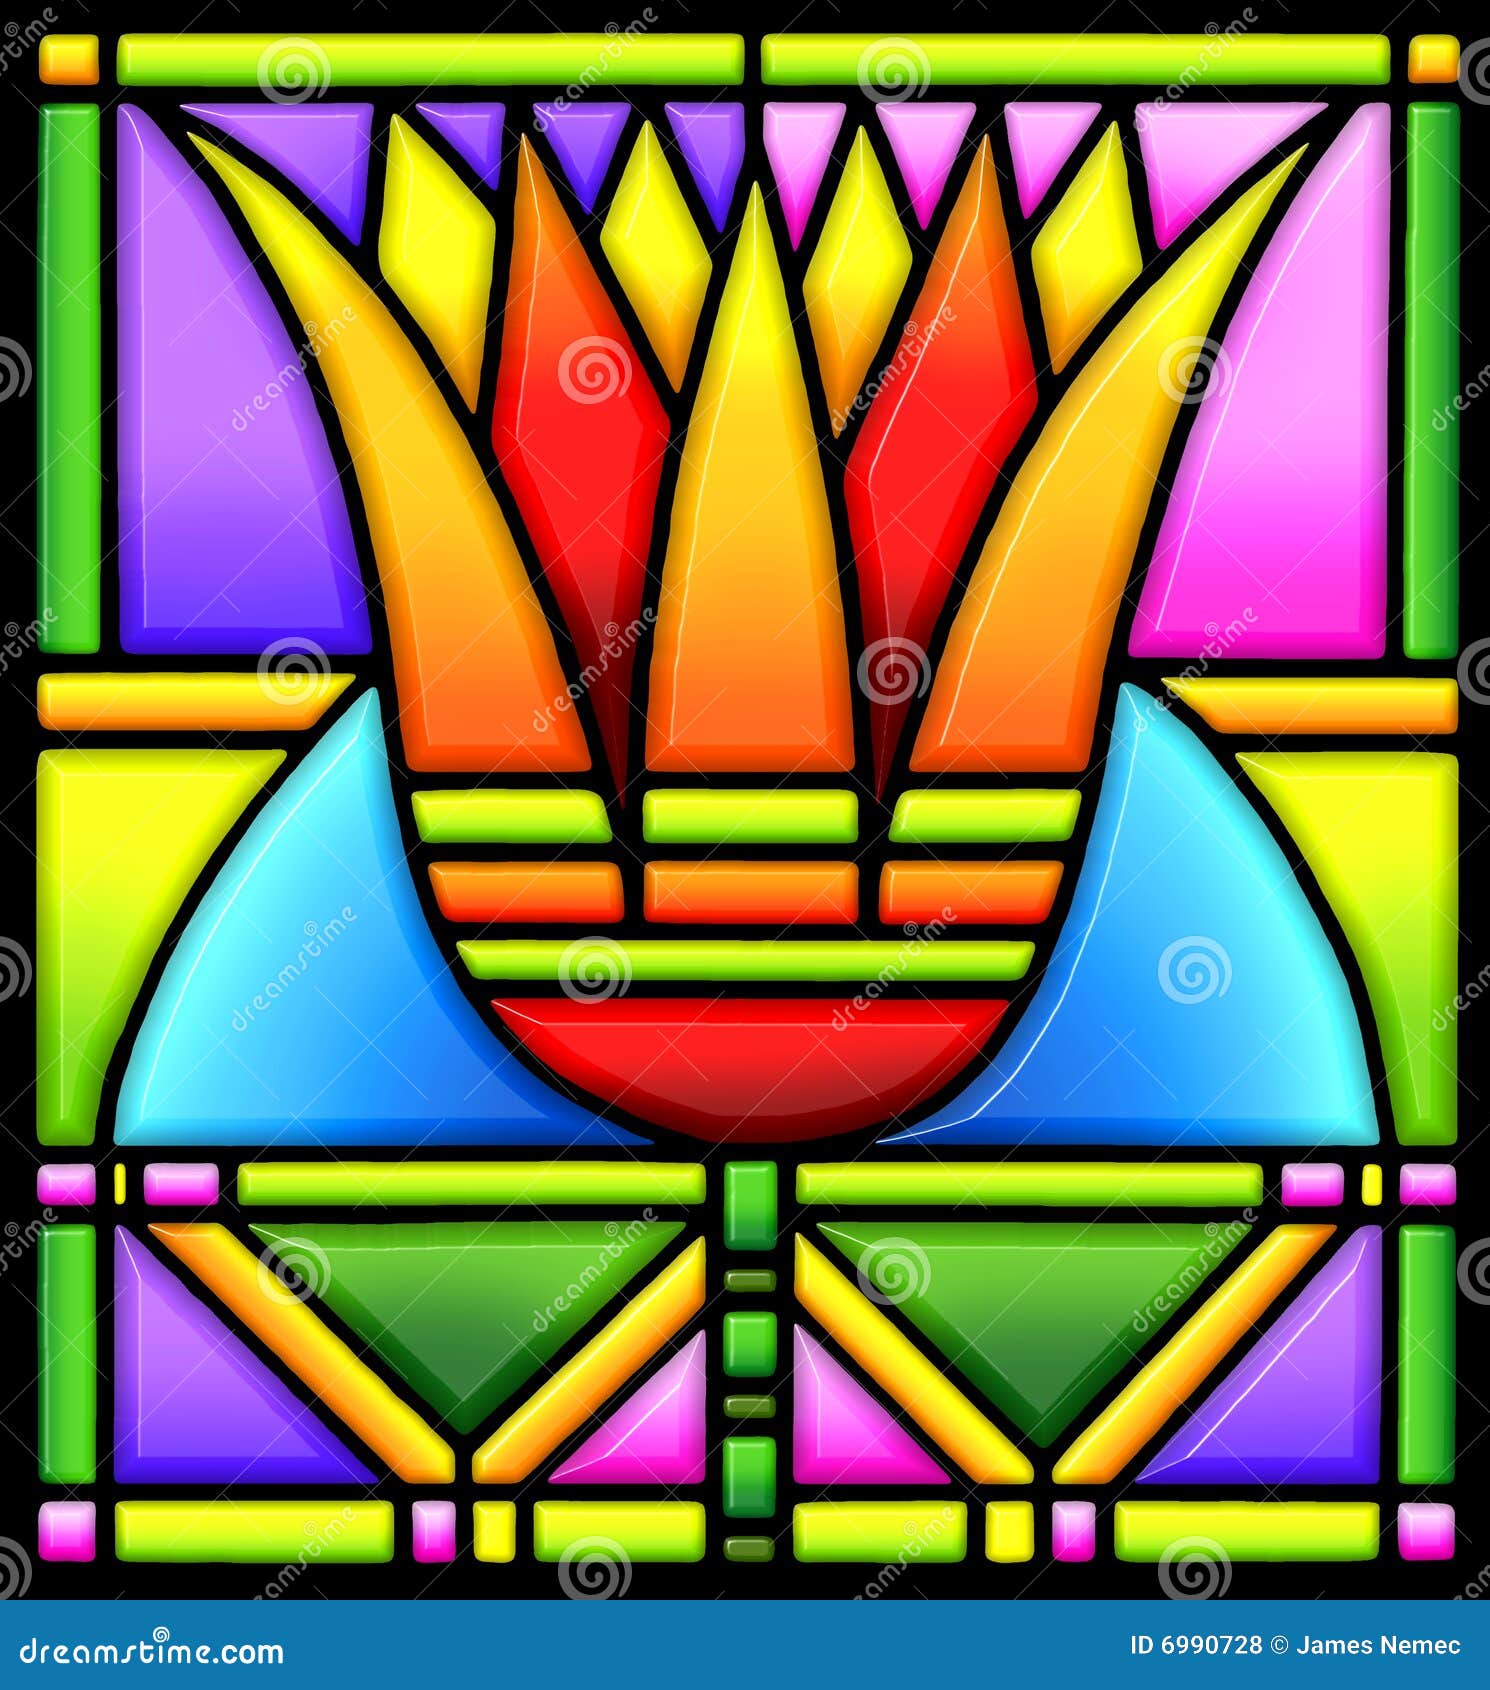 stained glass window clipart - photo #5